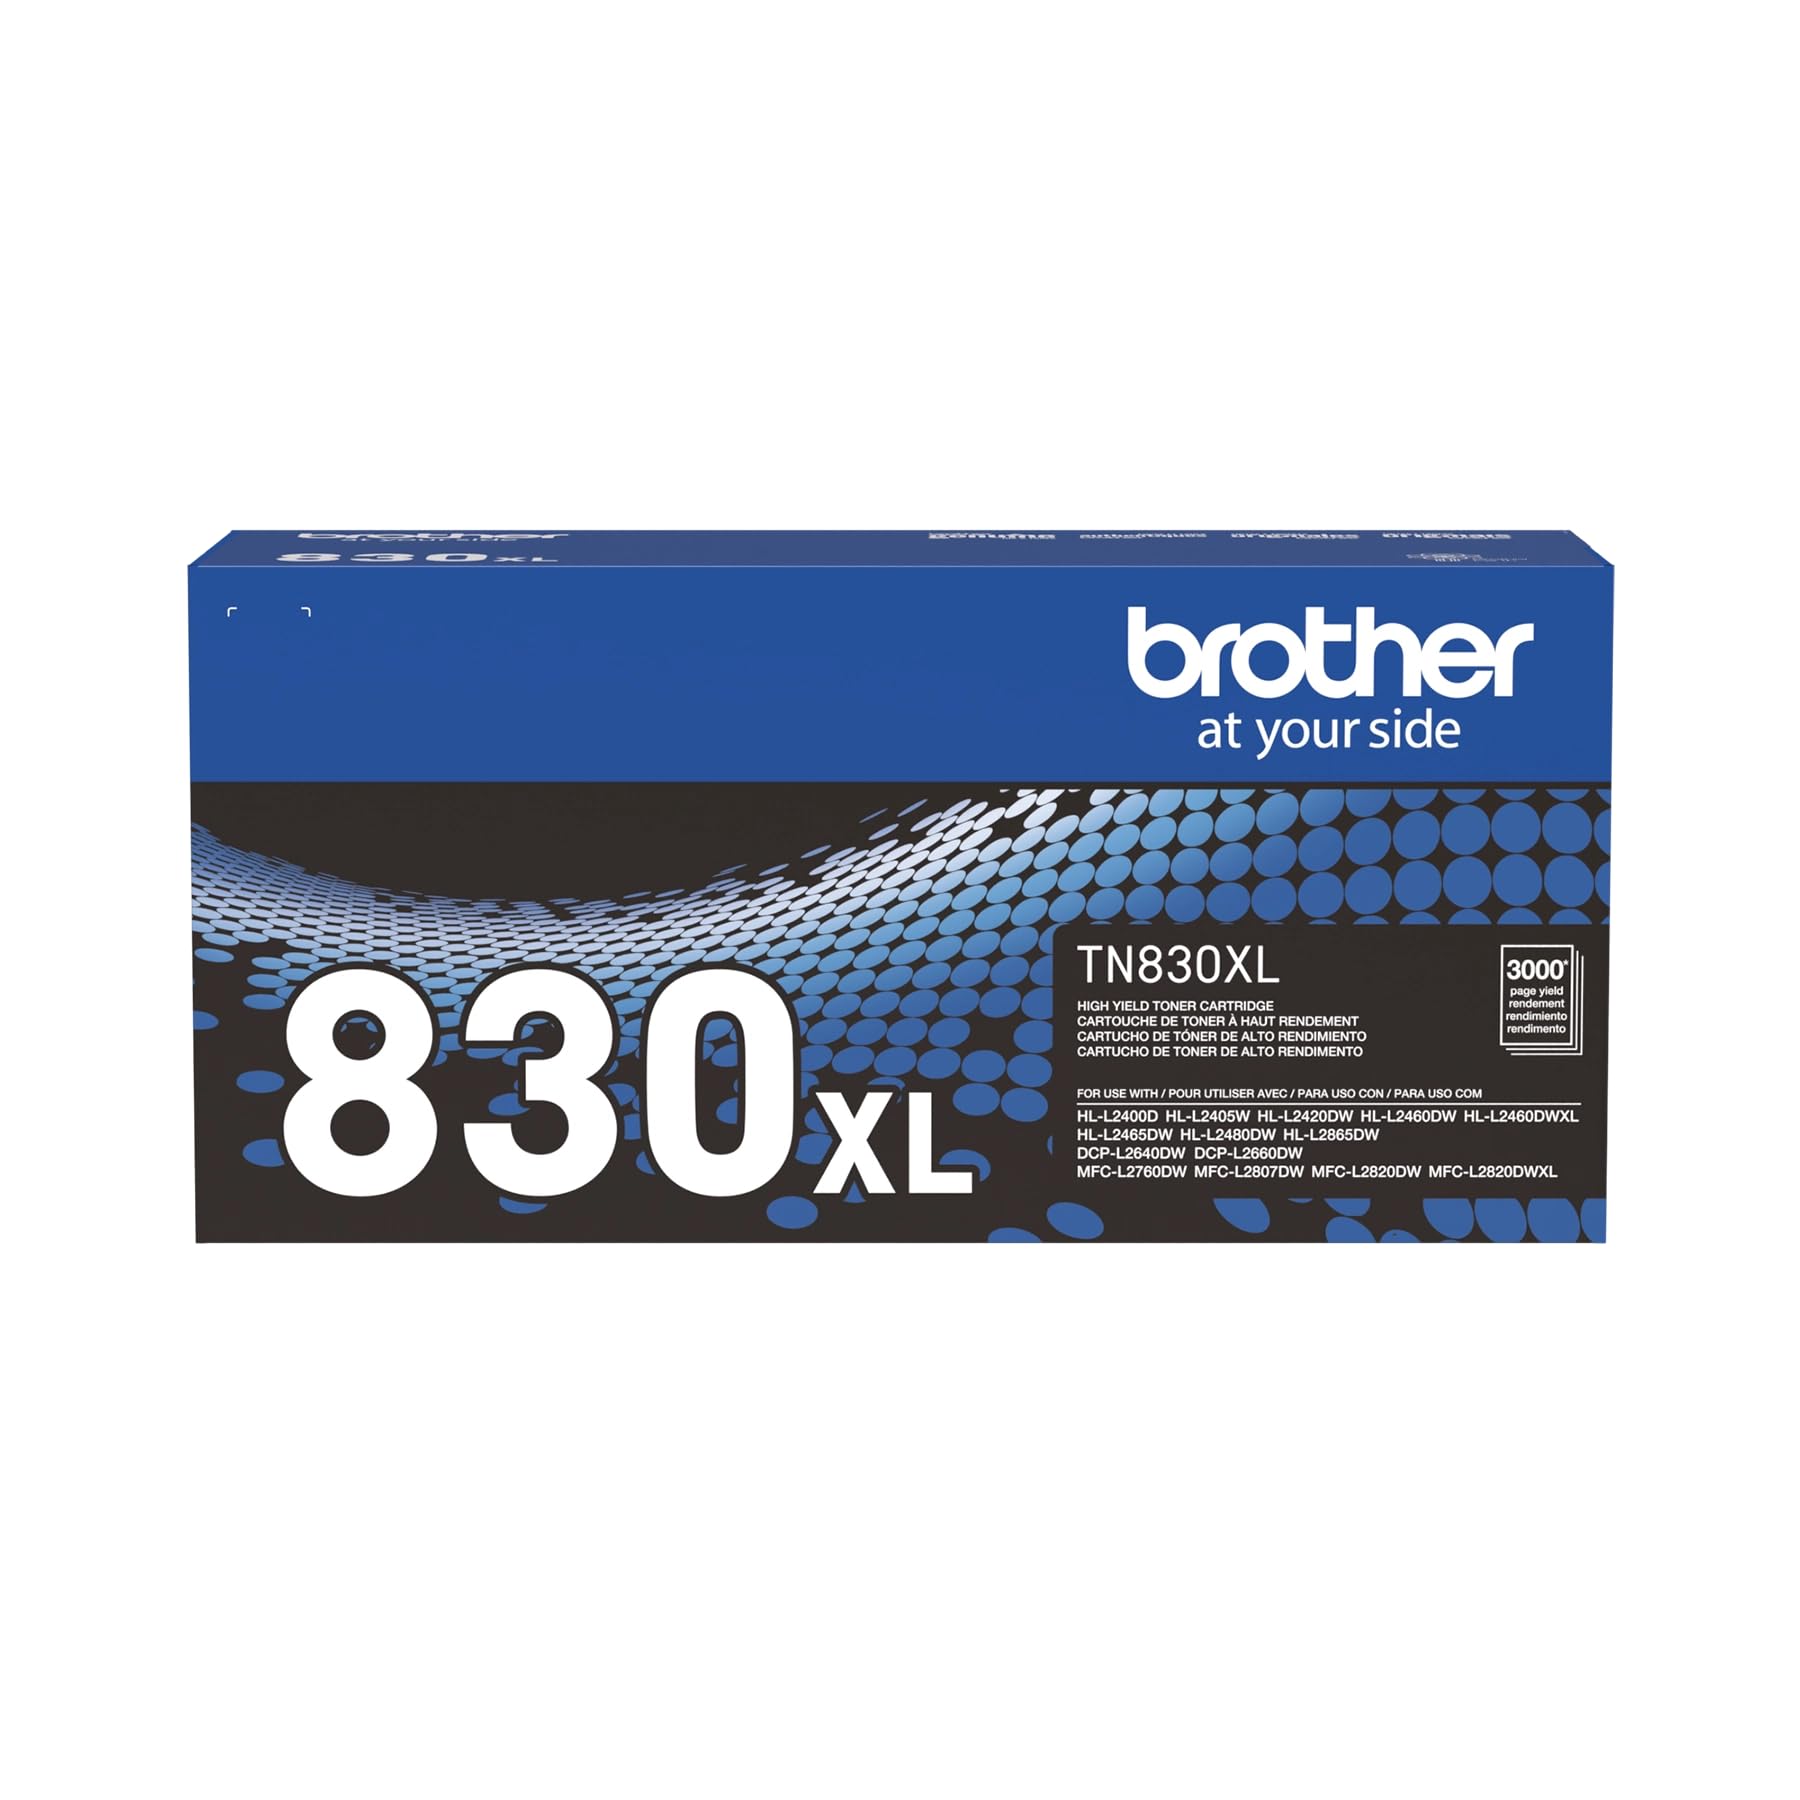 Brother Genuine TN830XL Black High Yield Printer Toner Cartridge - Print up to 3,000 Pages(1)